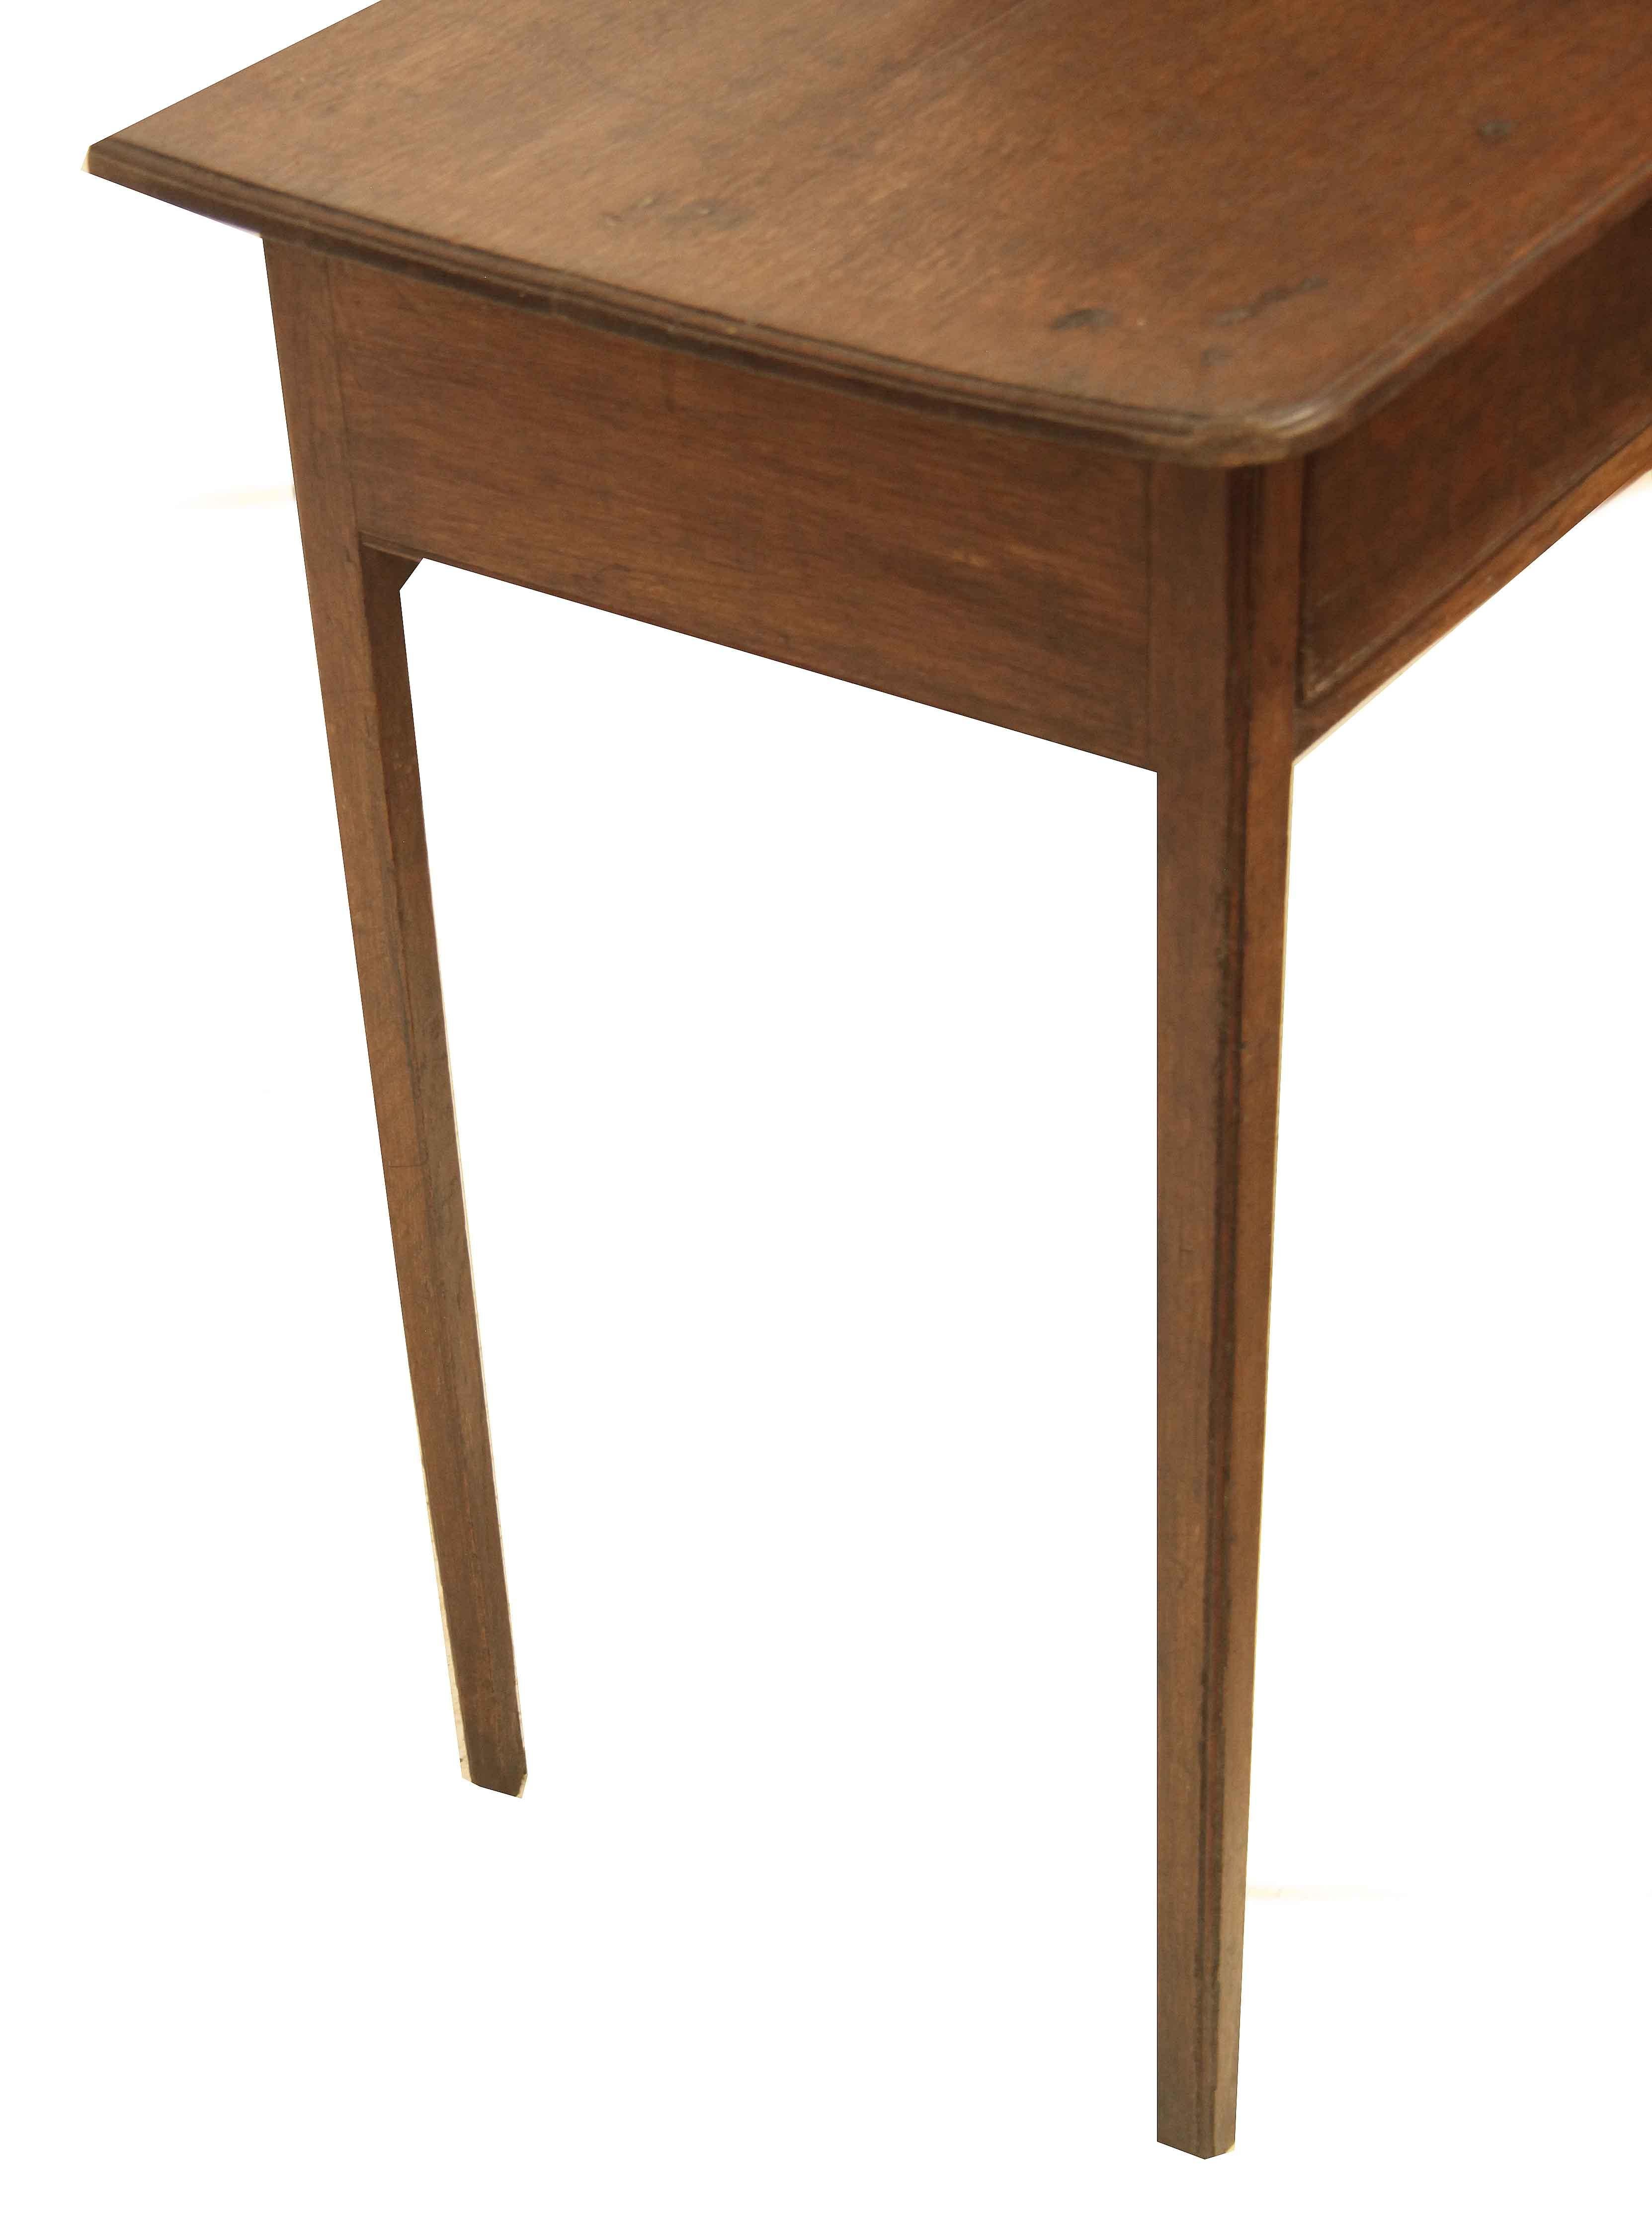 English oak side table, with excellent color and patina, the top has rounded front corners and a molded edge shaped from the top(not applied molding); the single drawer retains the original swan neck pull and raised escutcheon. The delicate but